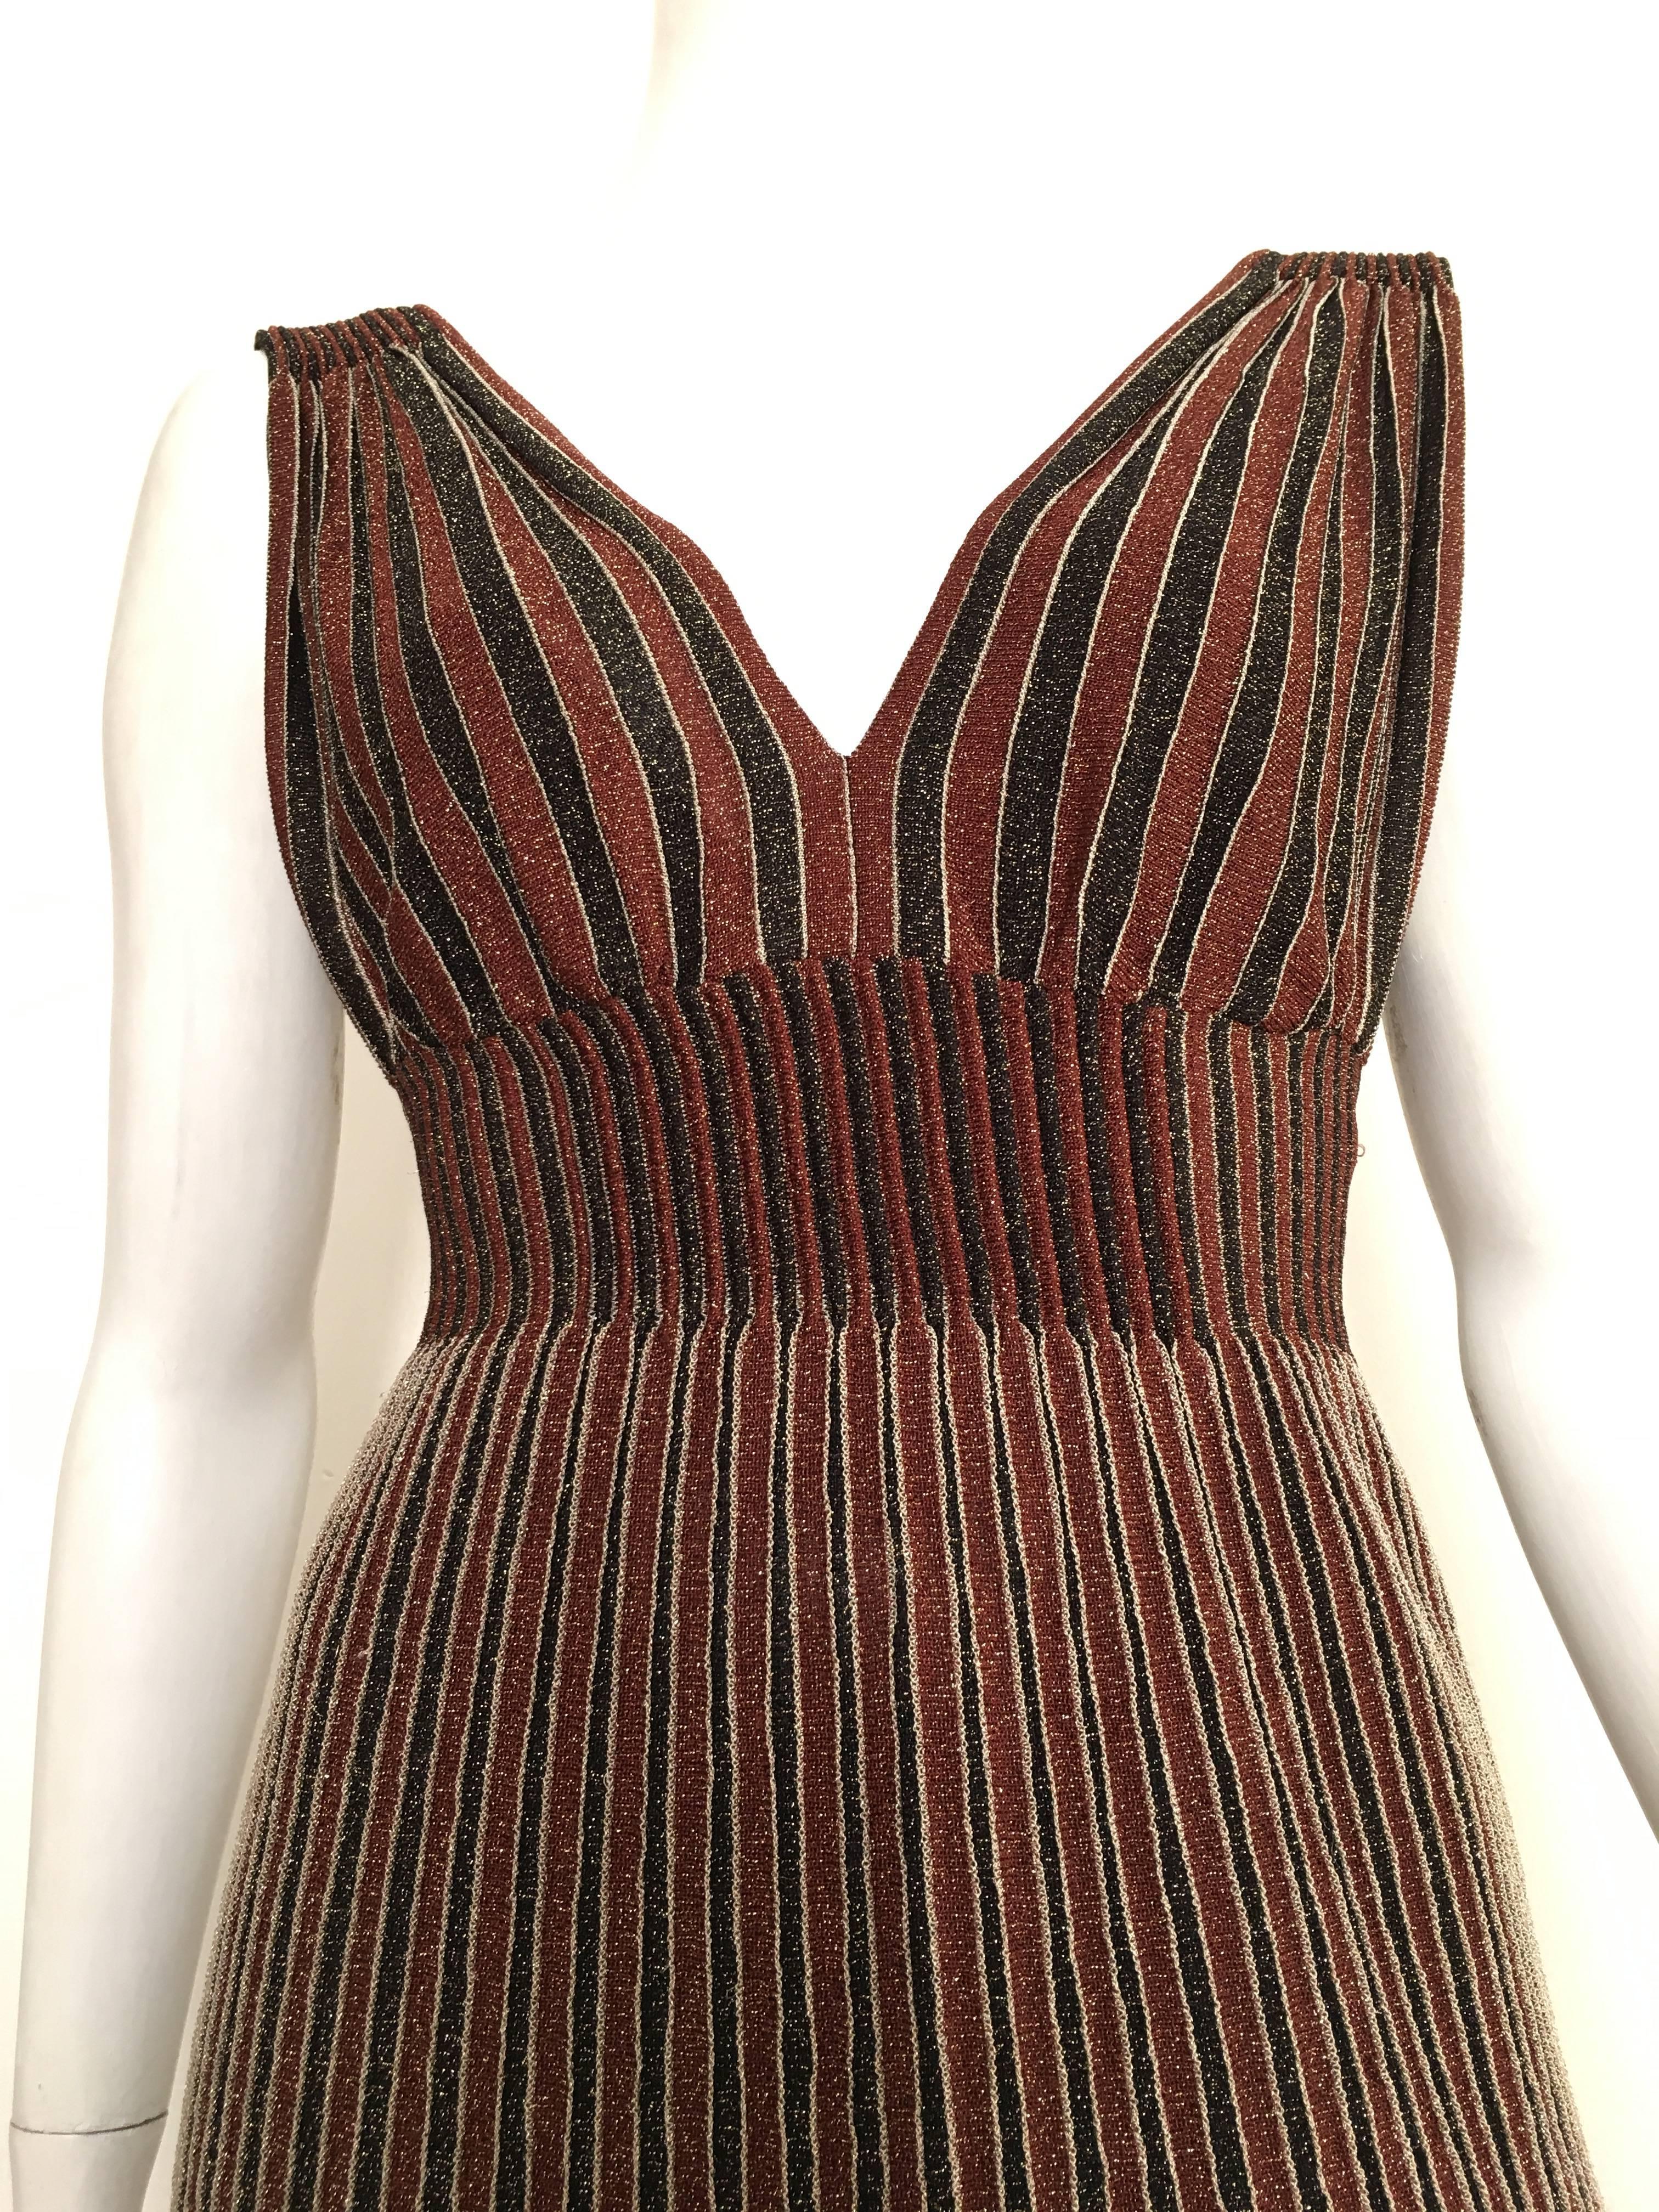 Missoni brown & black striped with gold metallic threading is an USA size 4/6.  Ladies please grab your tape measure so you can properly measure your bust, waist & hips to make certain this will fit your lovely body. Dress has a built in slip for